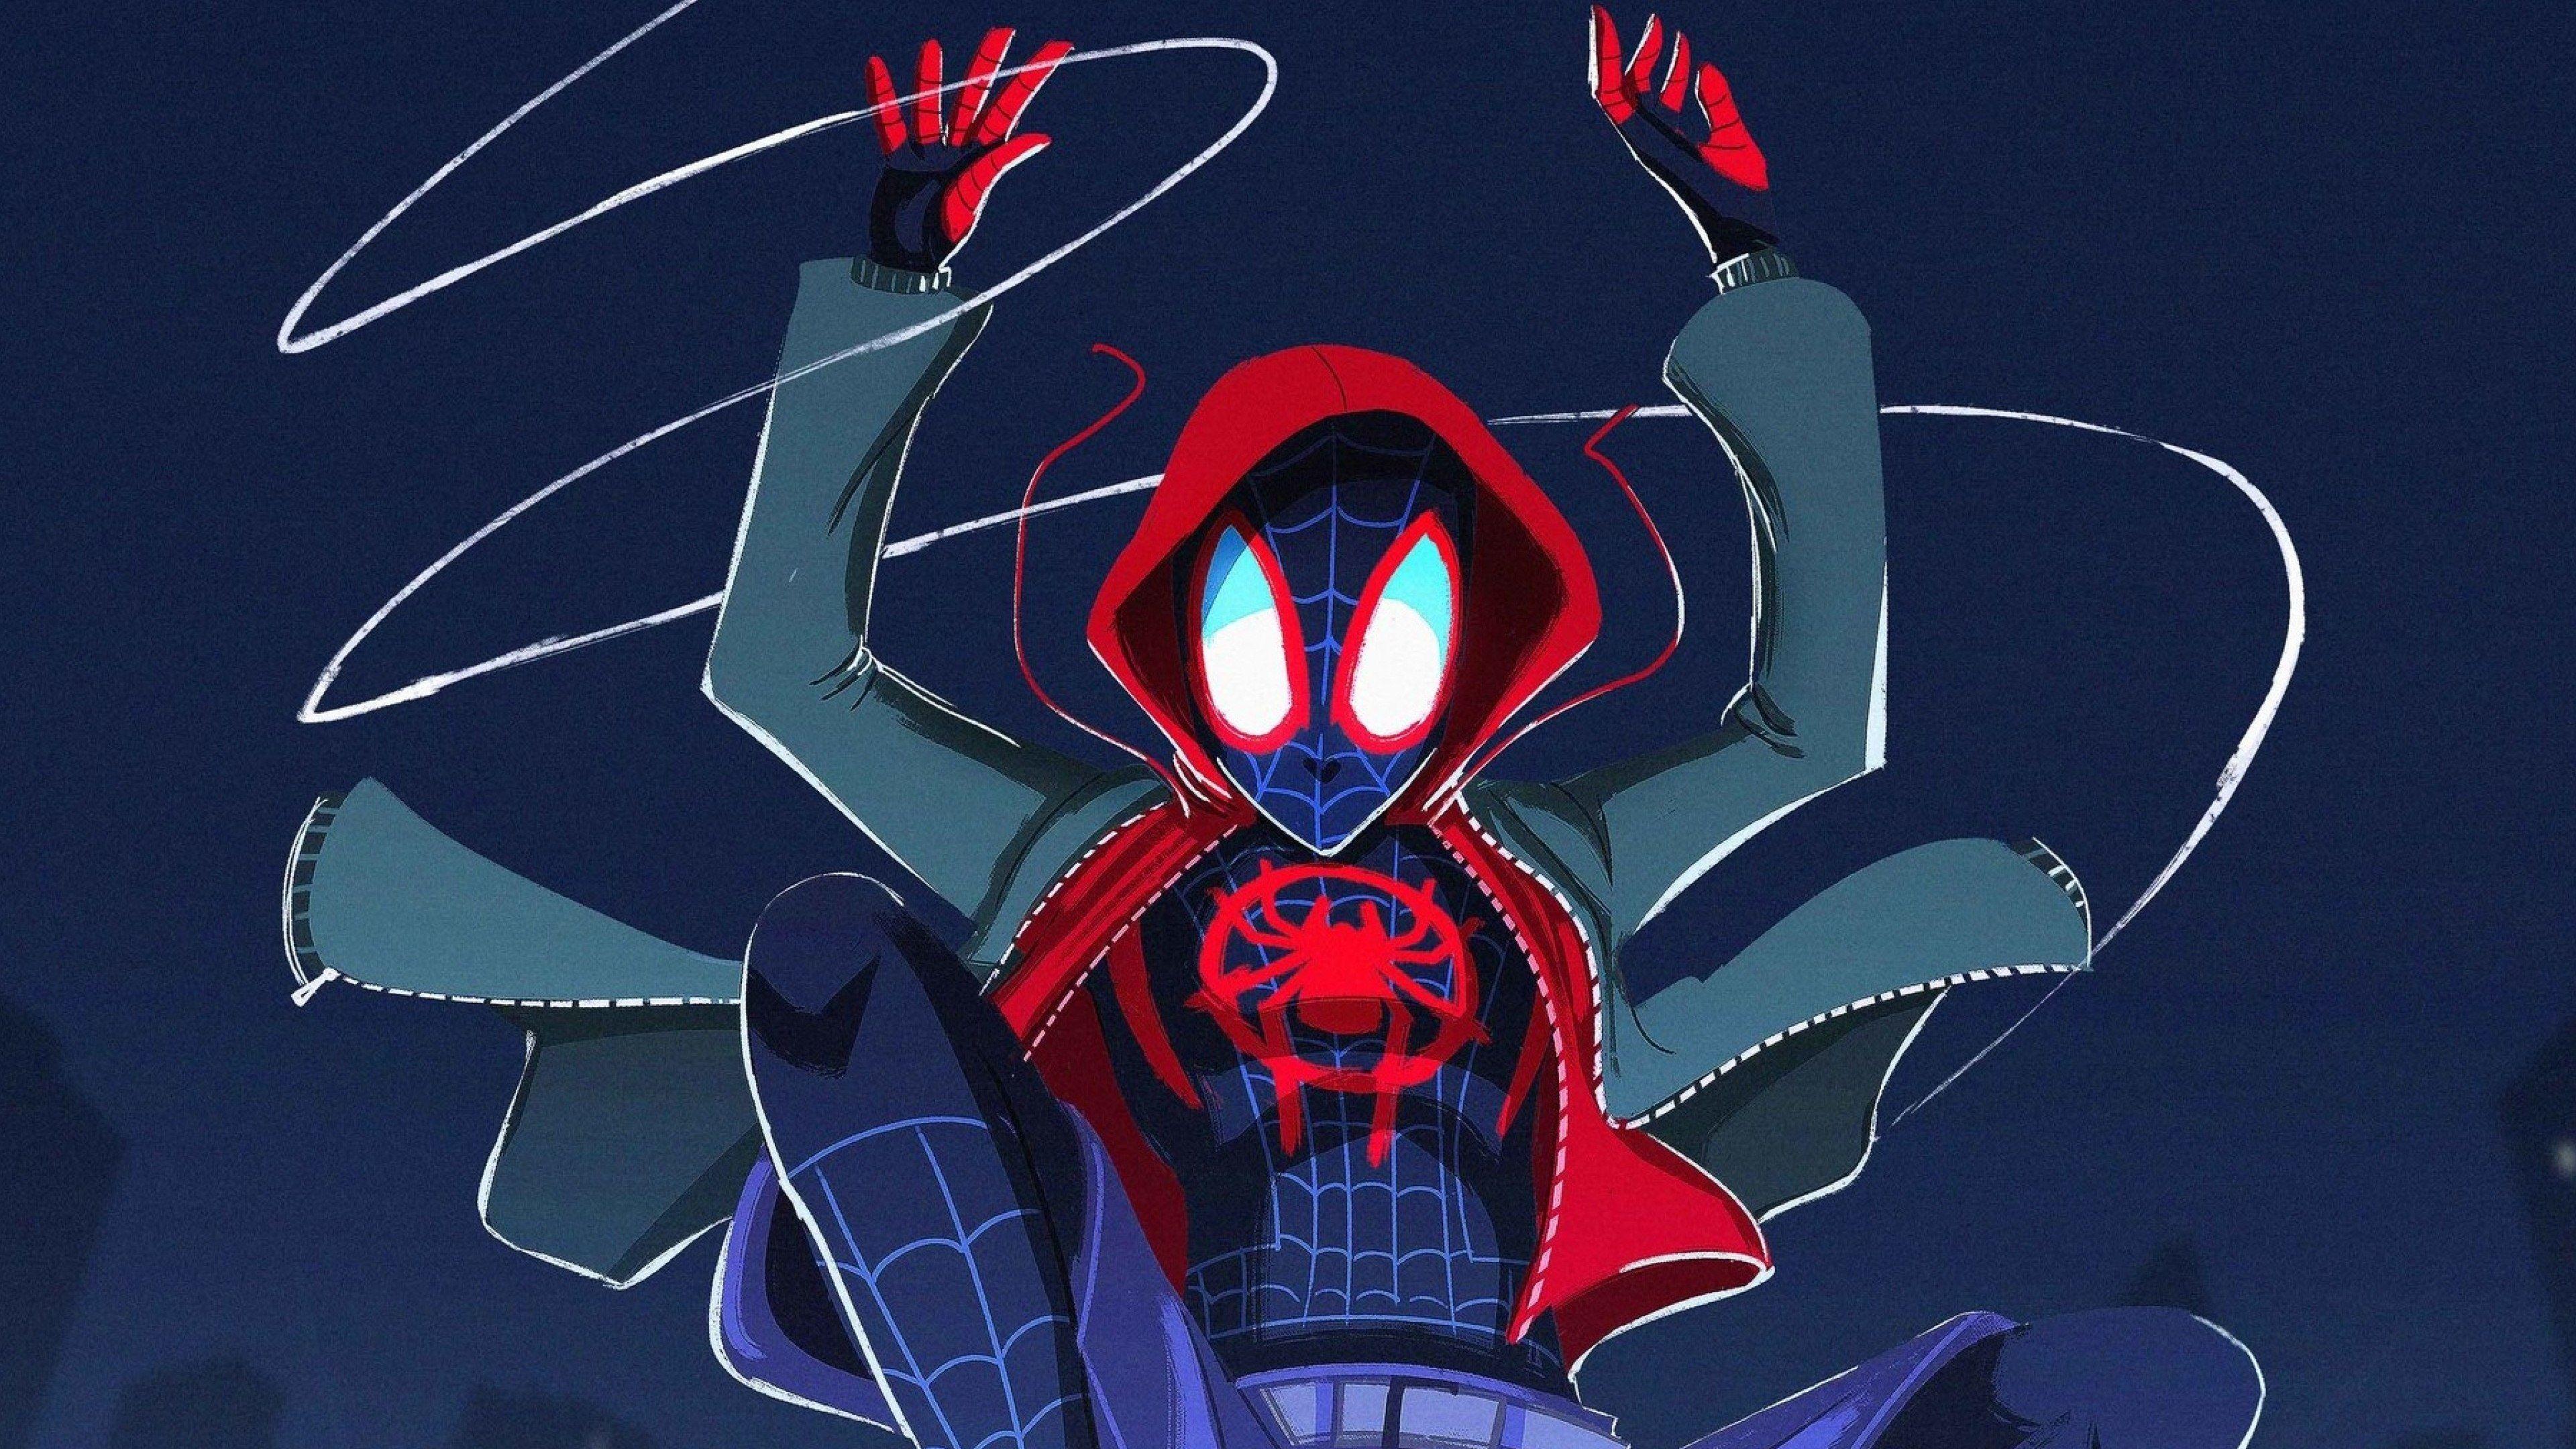 Anime Spiderman Wallpapers - Top Free Anime Spiderman Backgrounds